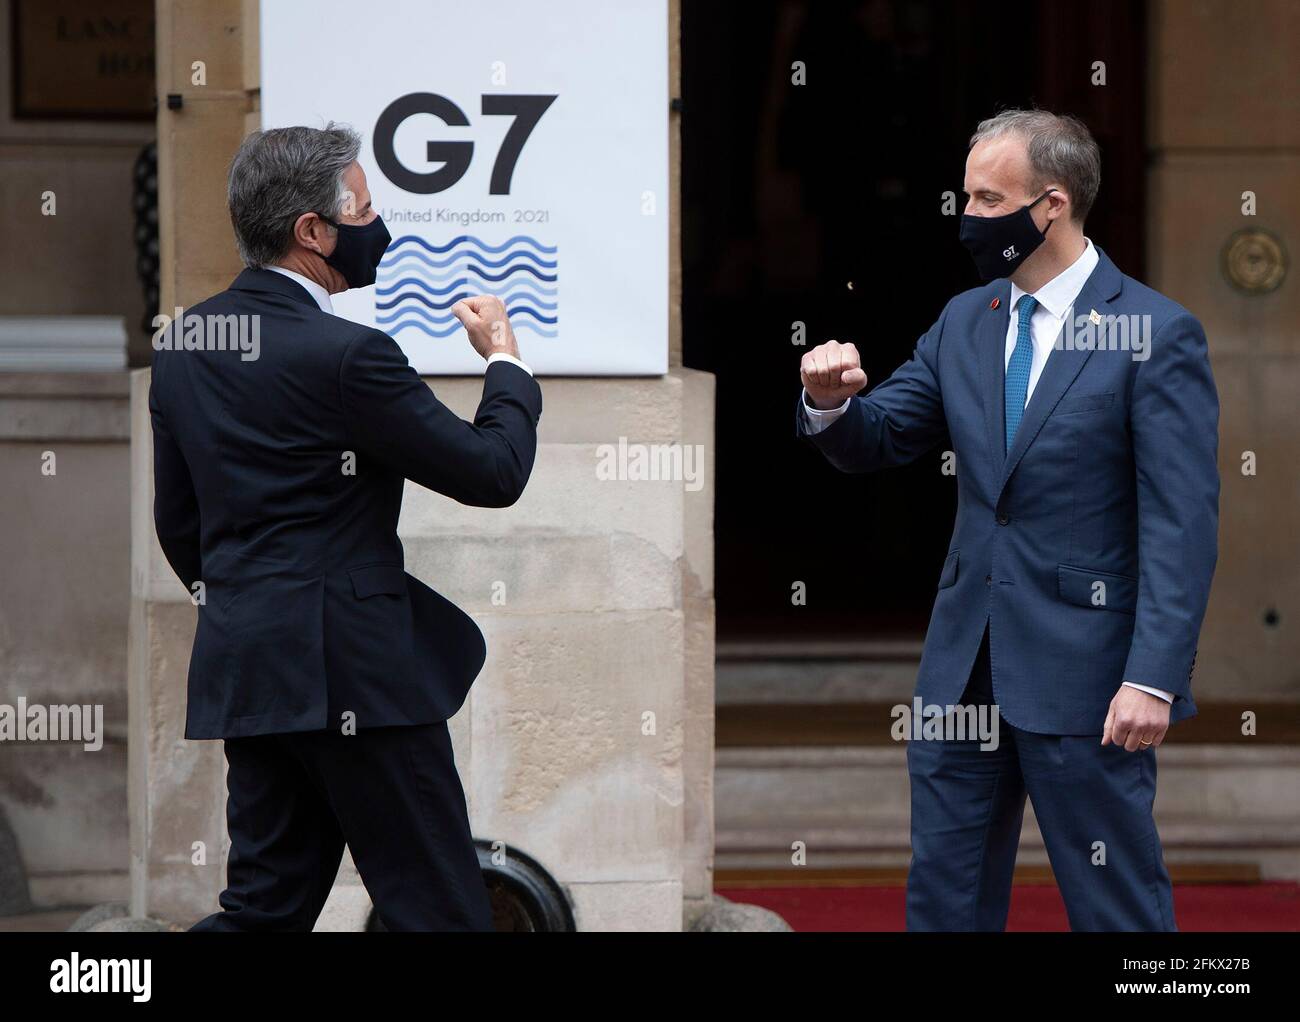 Foreign Secretary Dominic Raab (right) greets US Secretary of State Antony Blinken, as he arrives at Lancaster House in London for talks with fellow foreign ministers from the G7 Foreign and Development Ministers meeting. Picture date: Tuesday May 4, 2021. Stock Photo